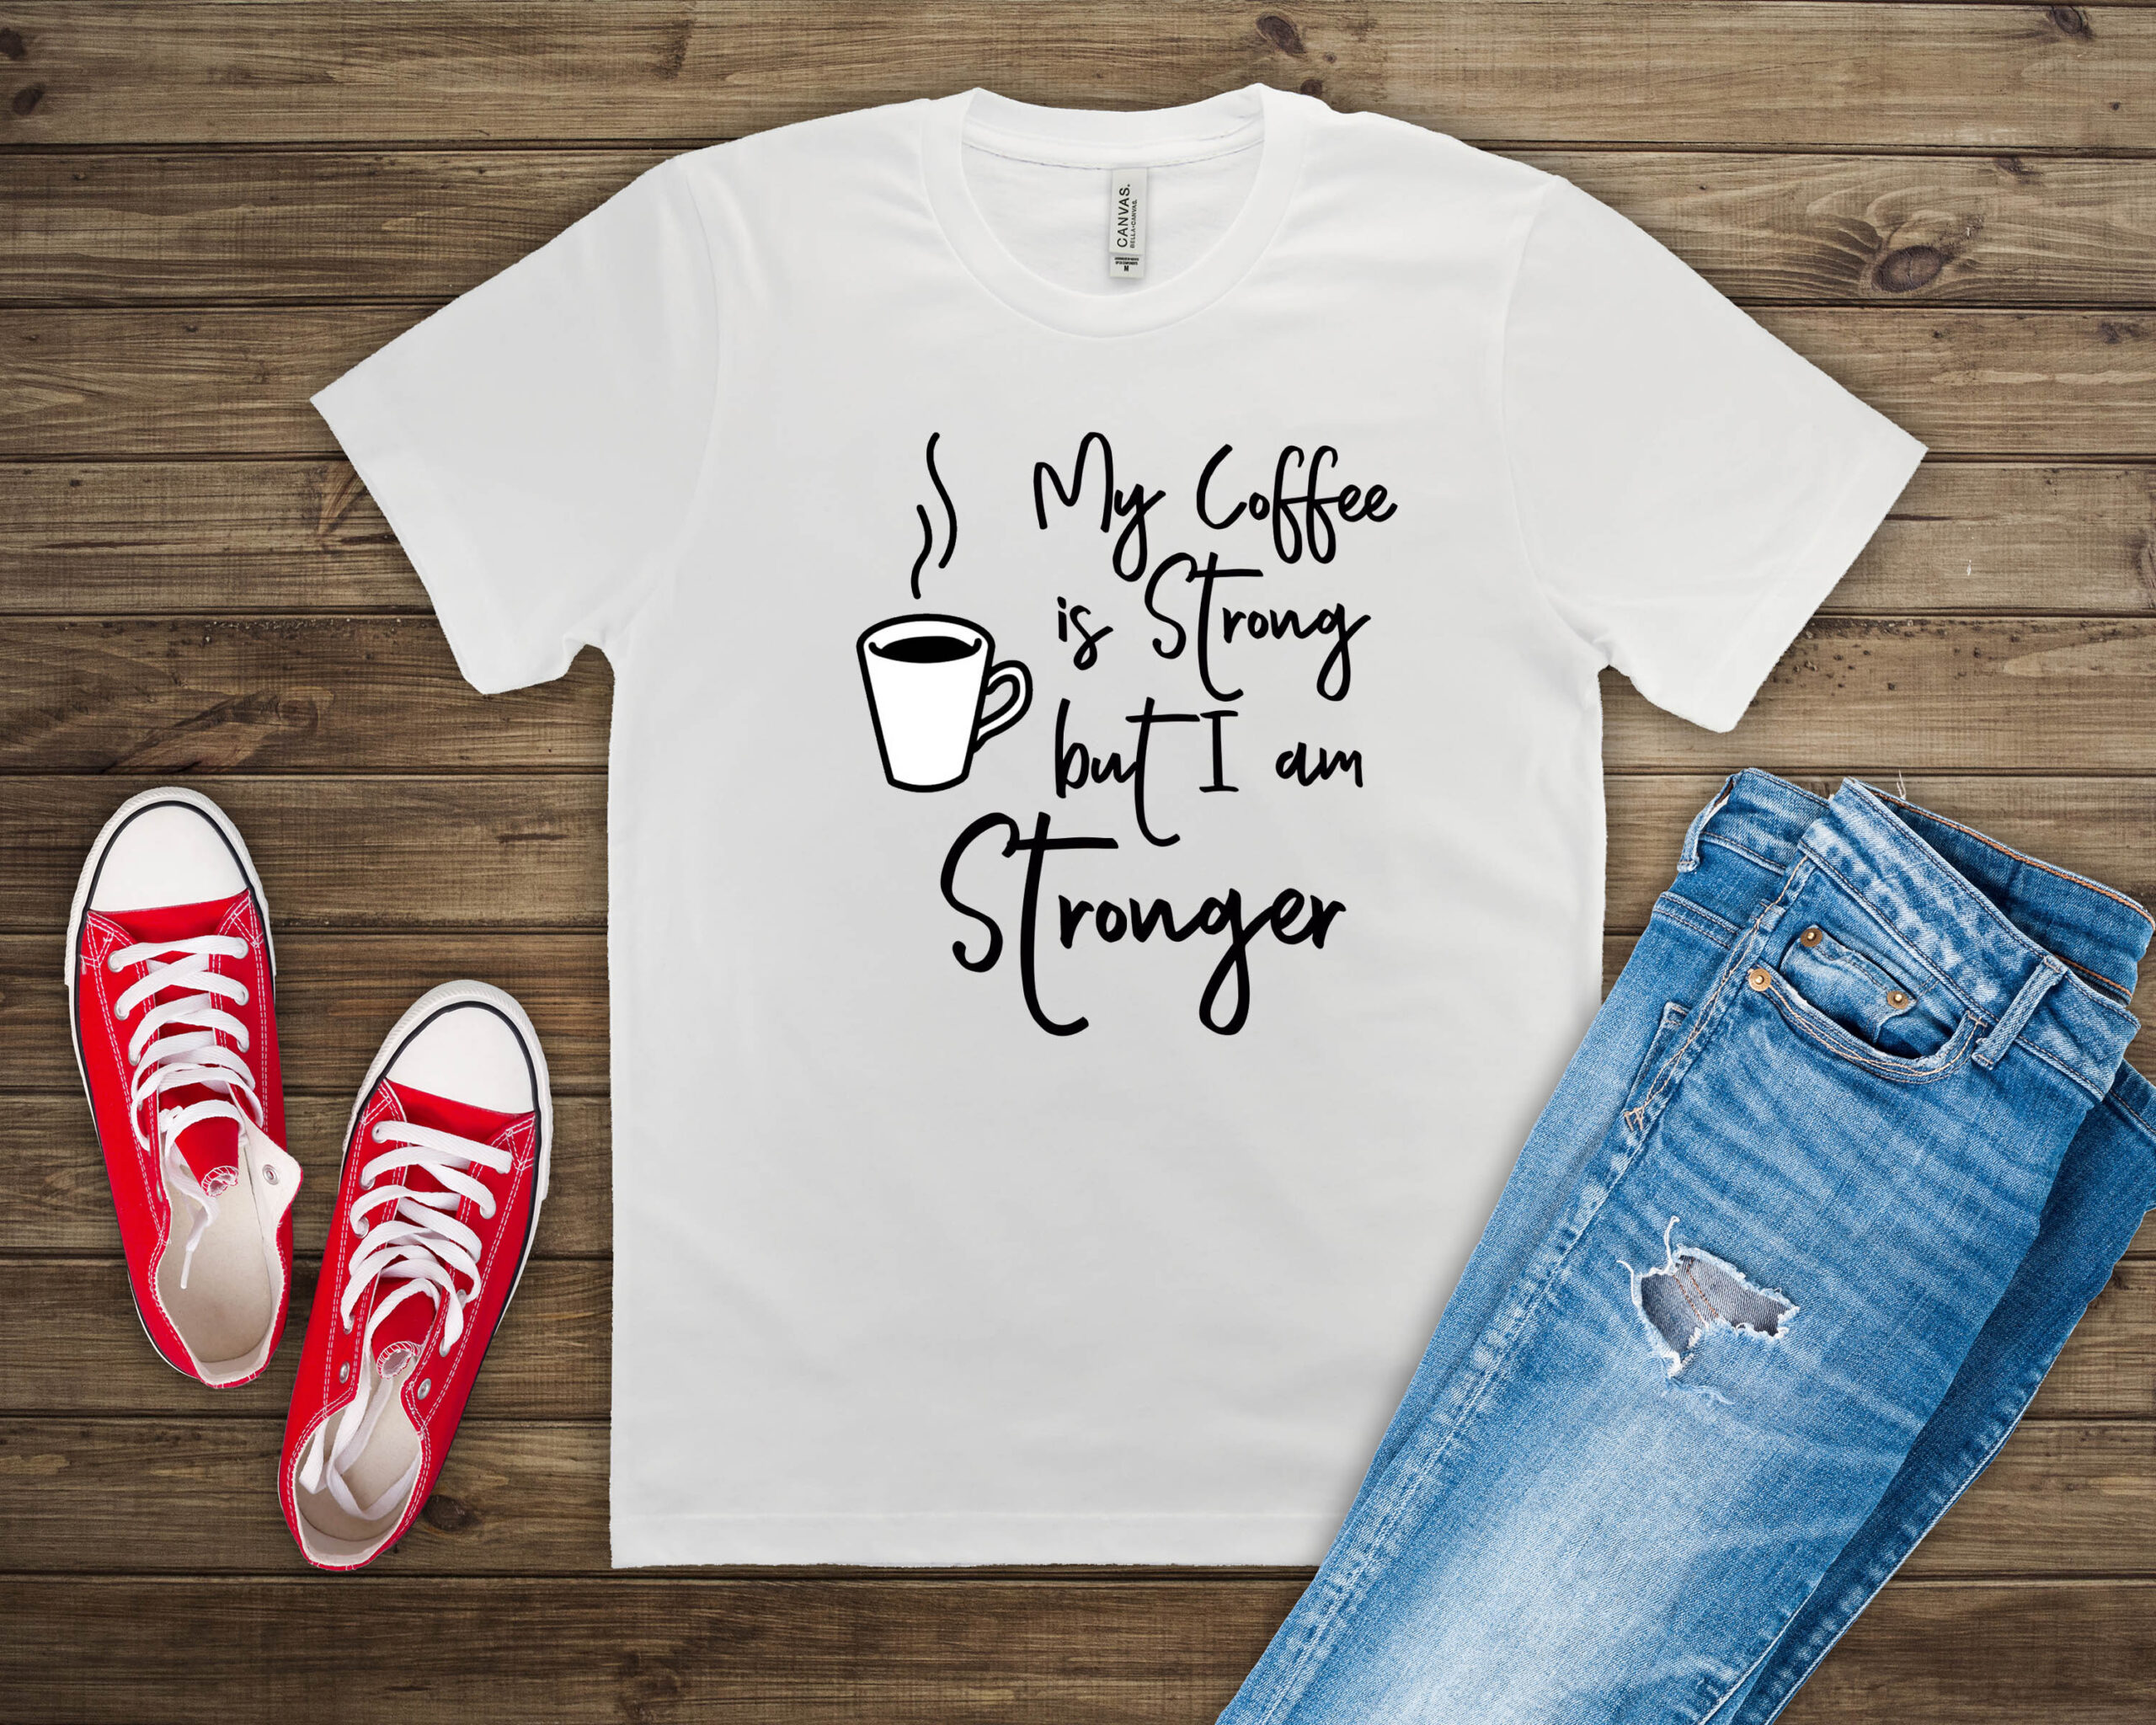 Free My Coffee is Strong SVG Cutting File for the Cricut. As this Free SVG File says, are you Stronger than your Coffee?